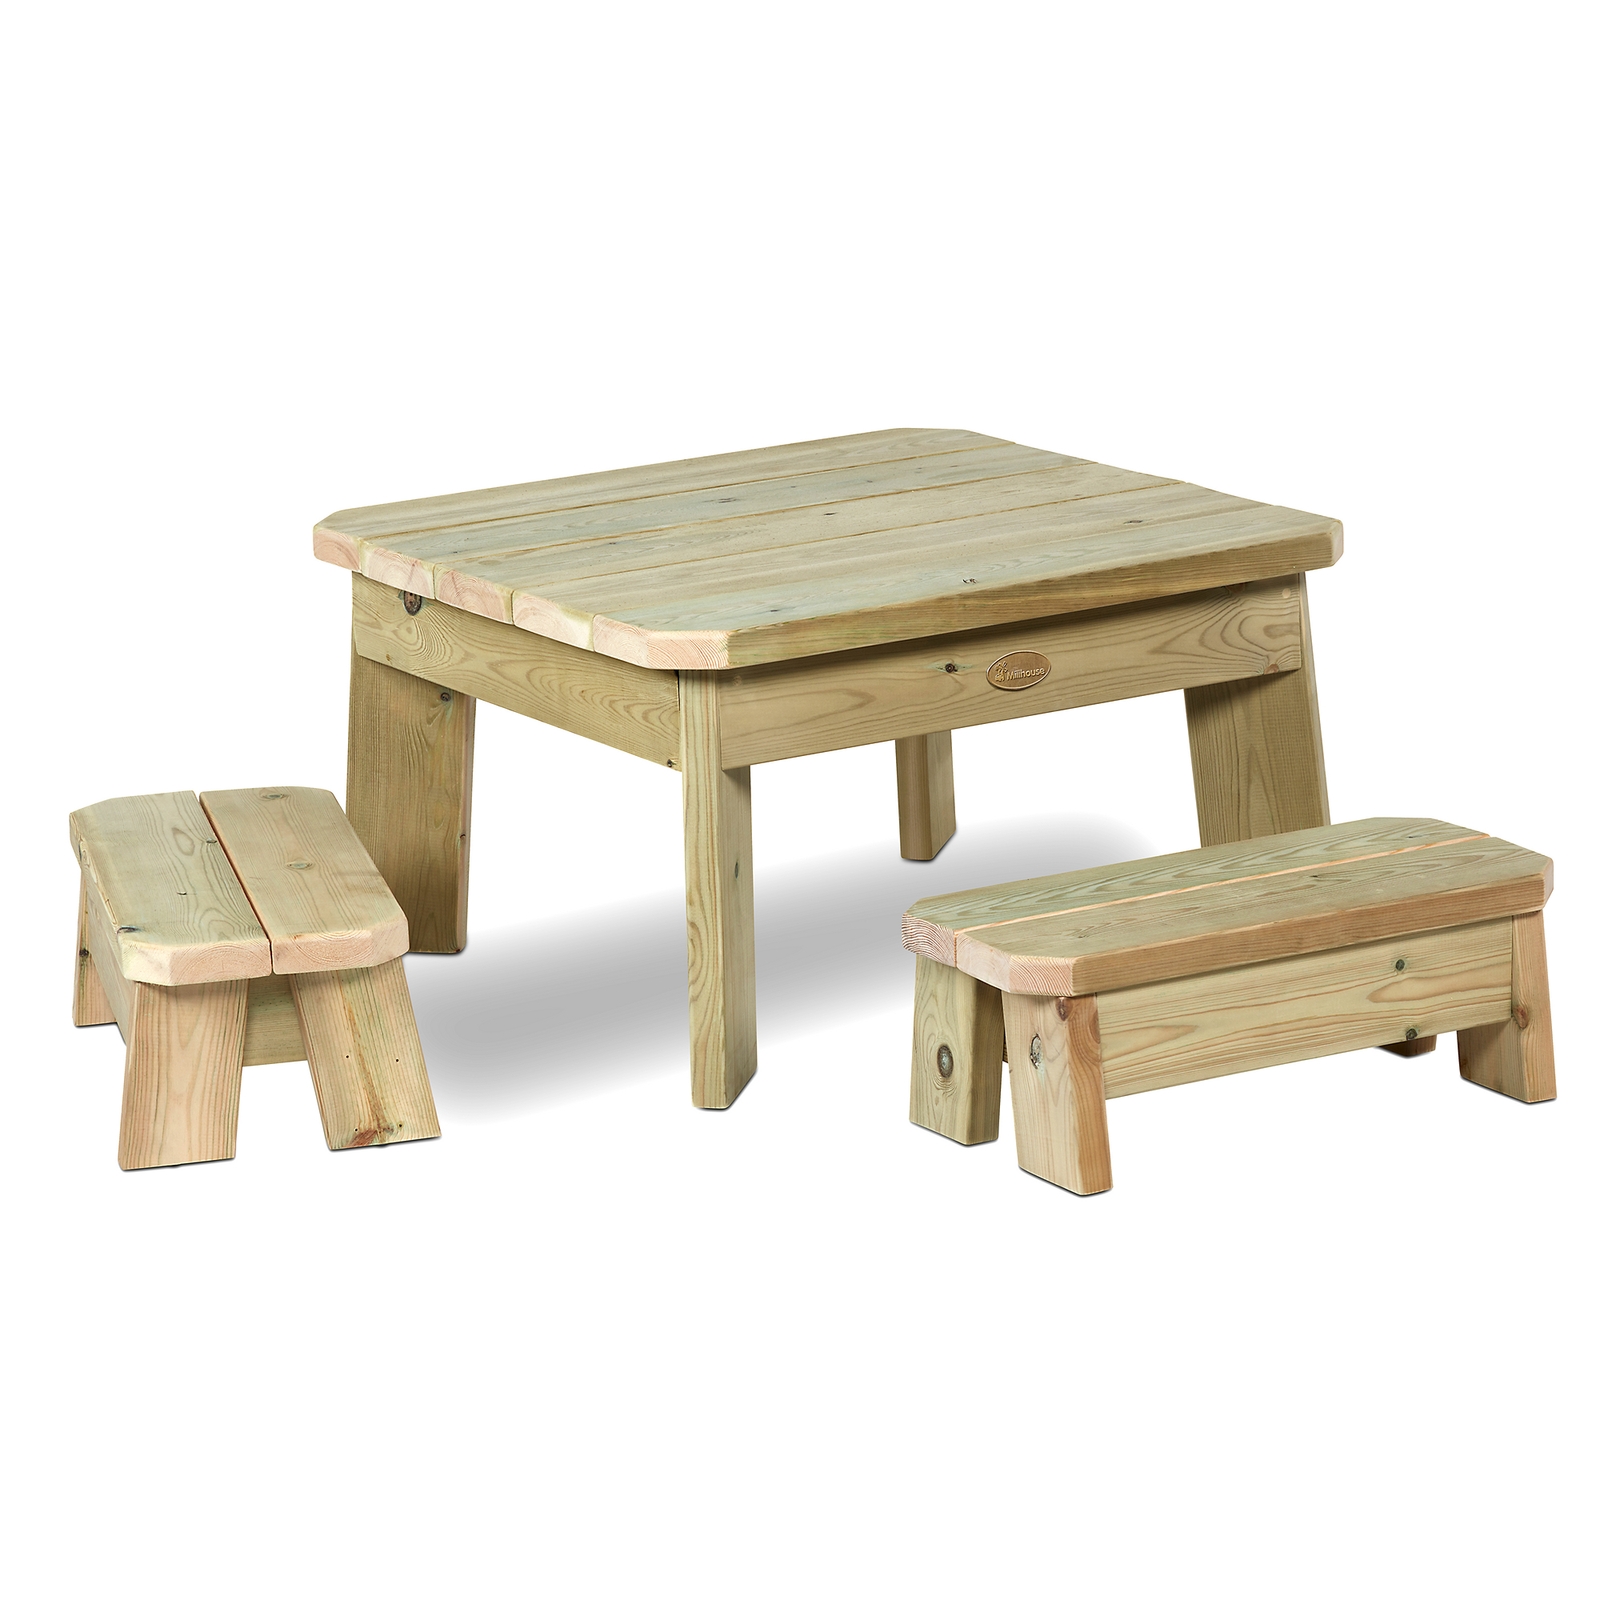 Square Table and Bench Set - Toddler